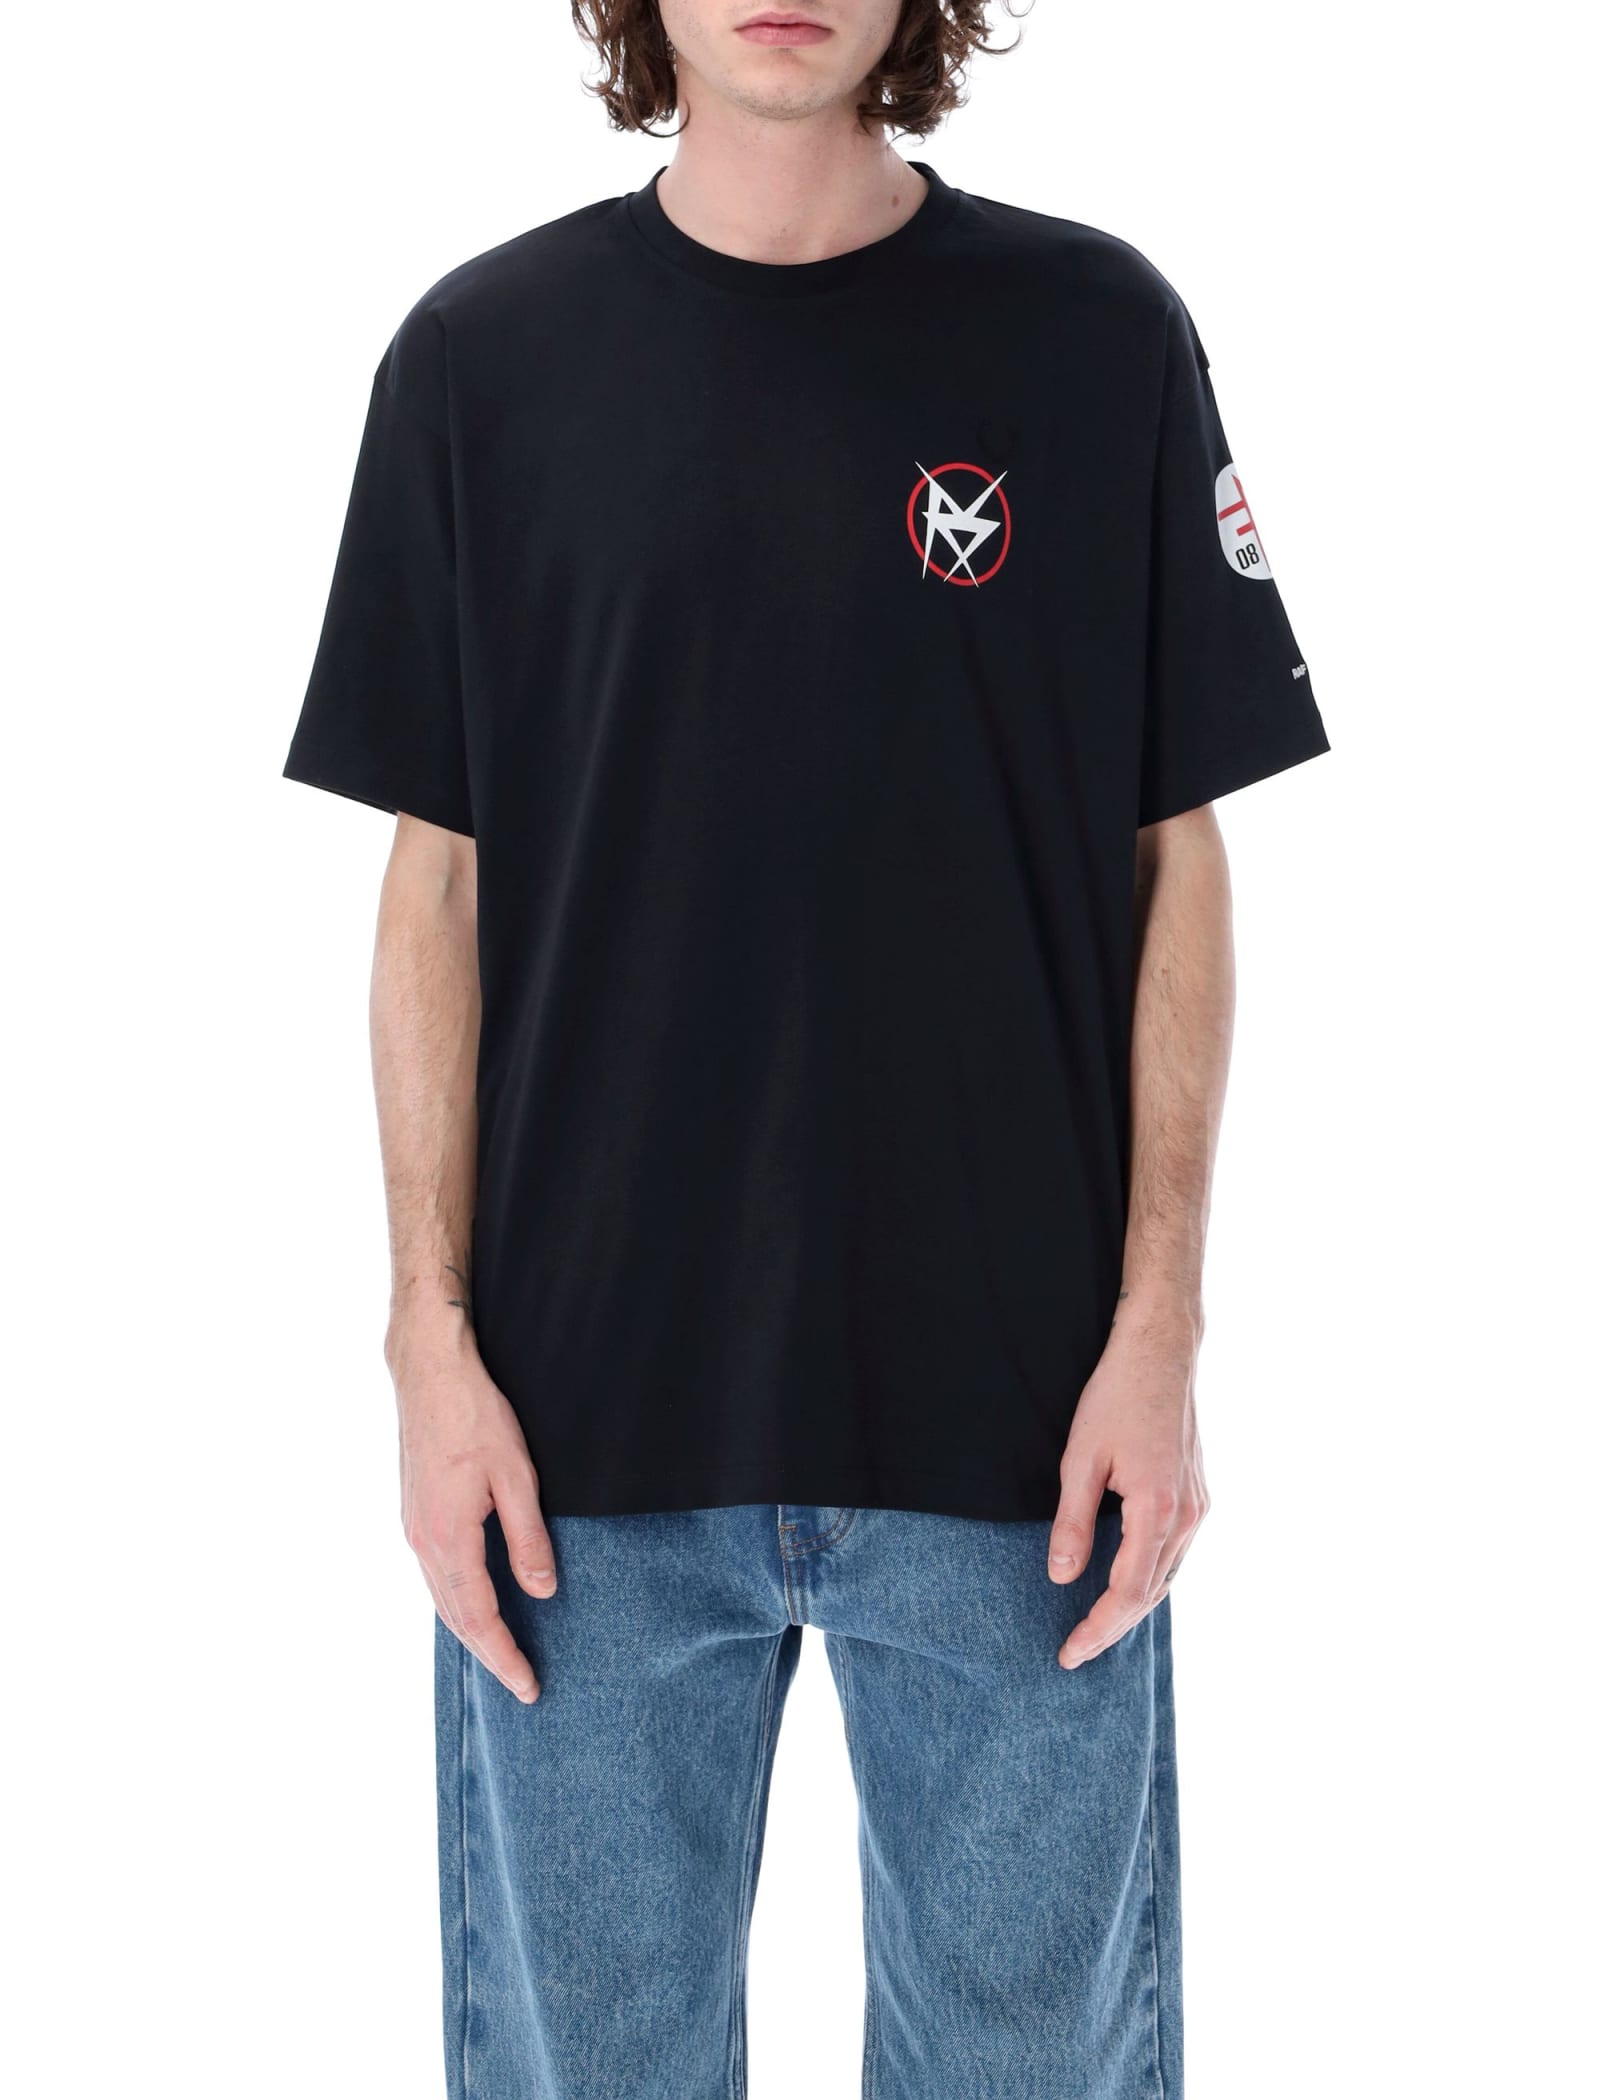 Fred Perry by Raf Simons Printed T-shirt